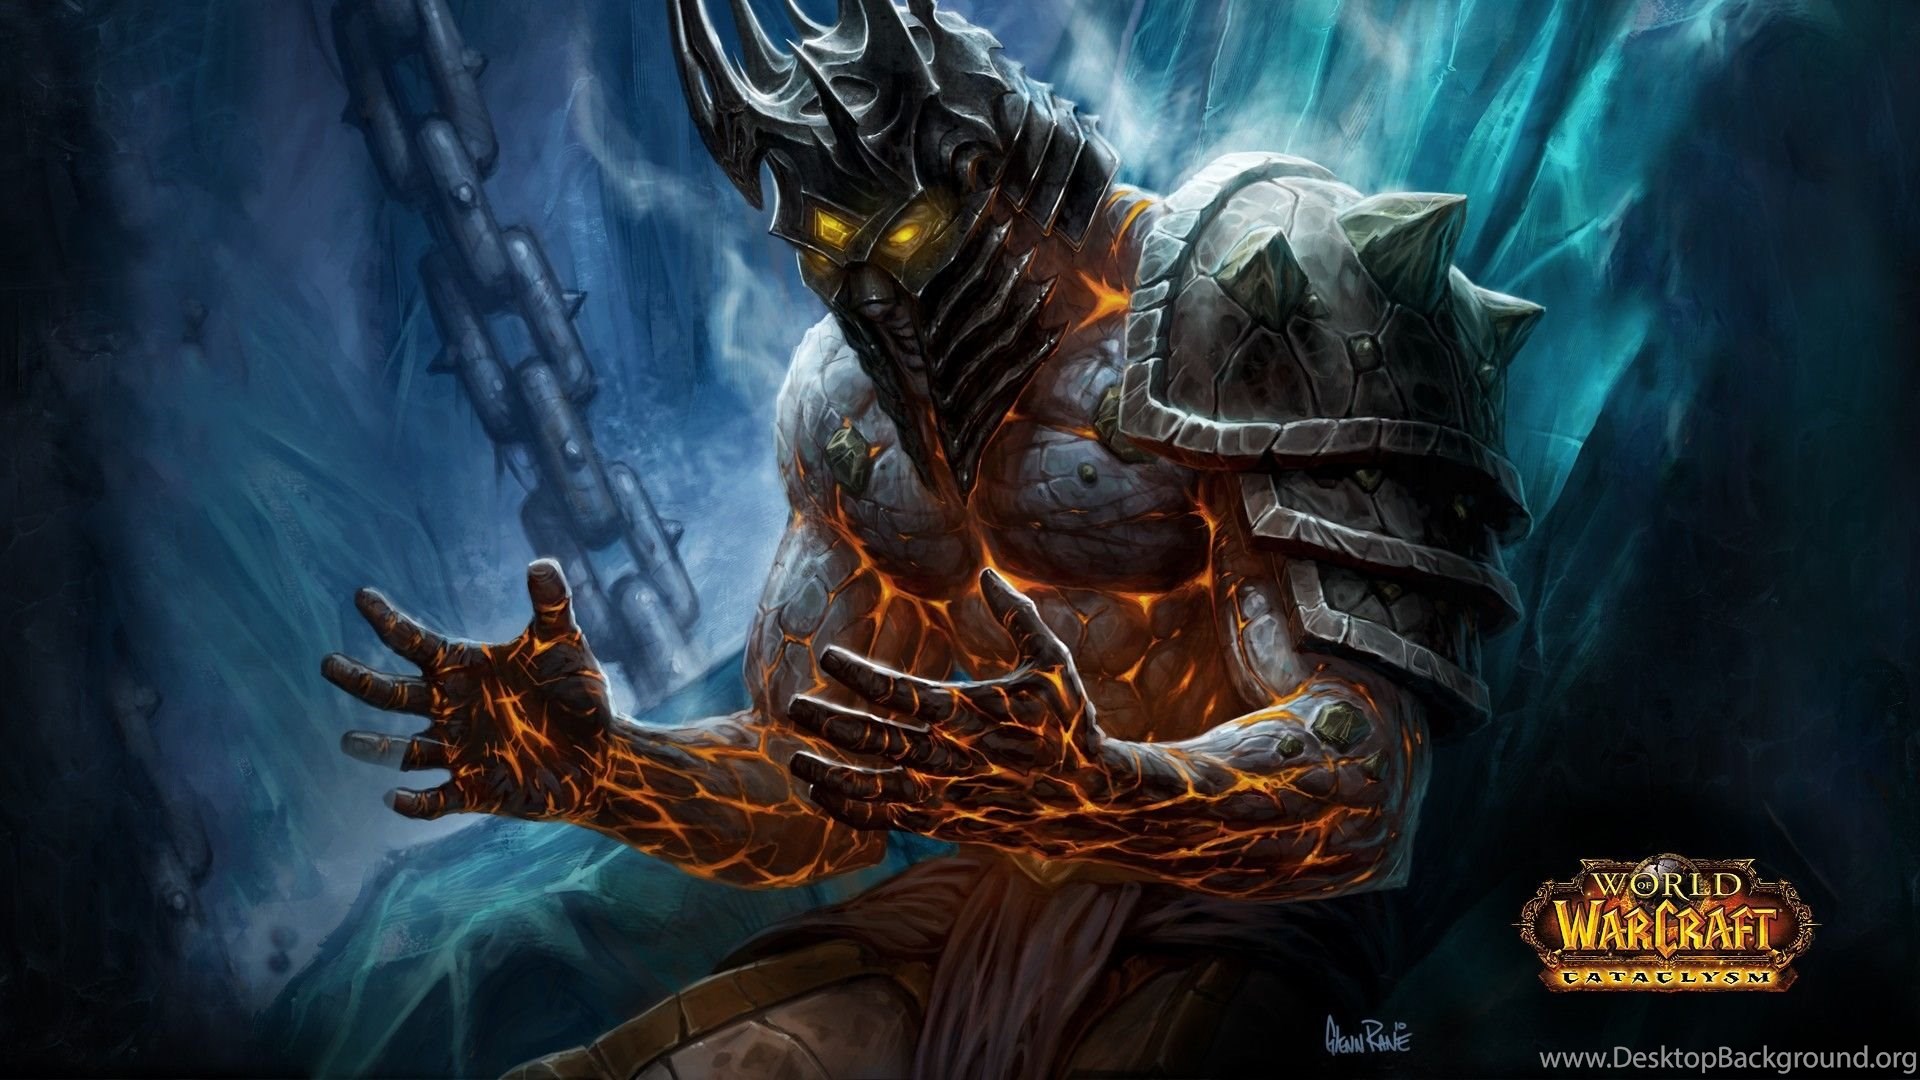 Hd World Of Warcraft Cataclysm Knight Wallpapers 1080p Full Size